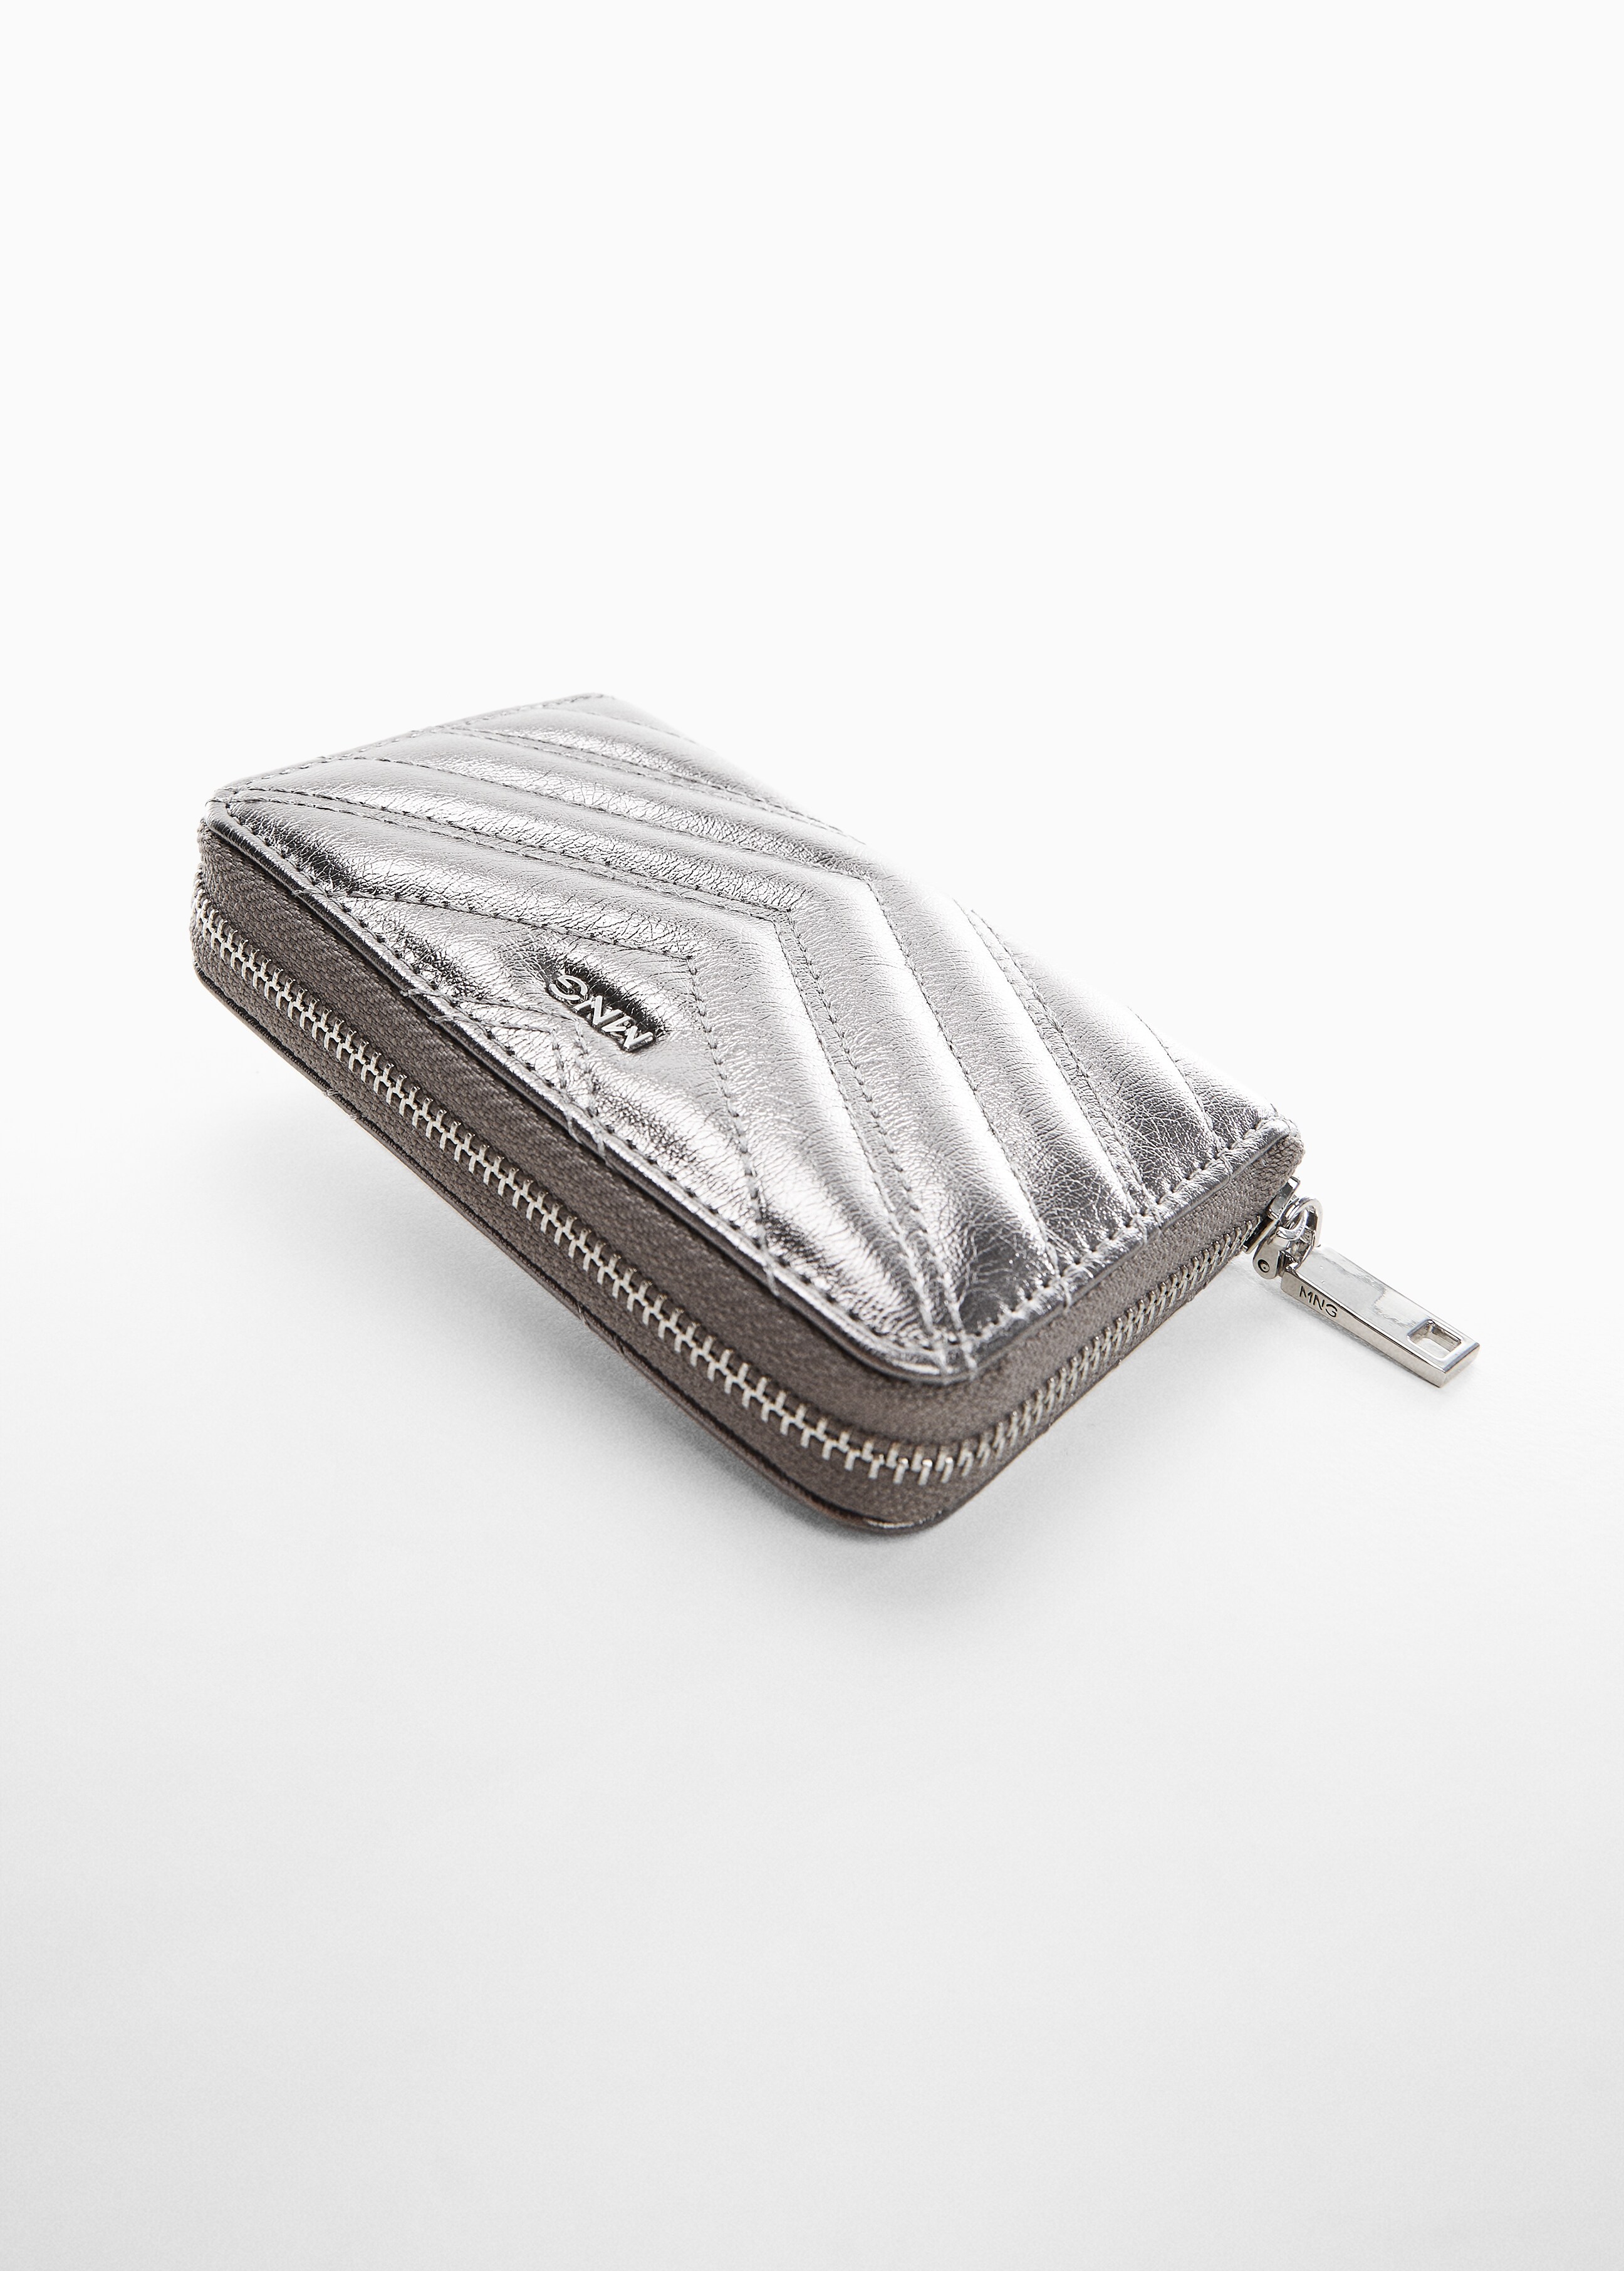 Padded metallic wallet - Details of the article 1